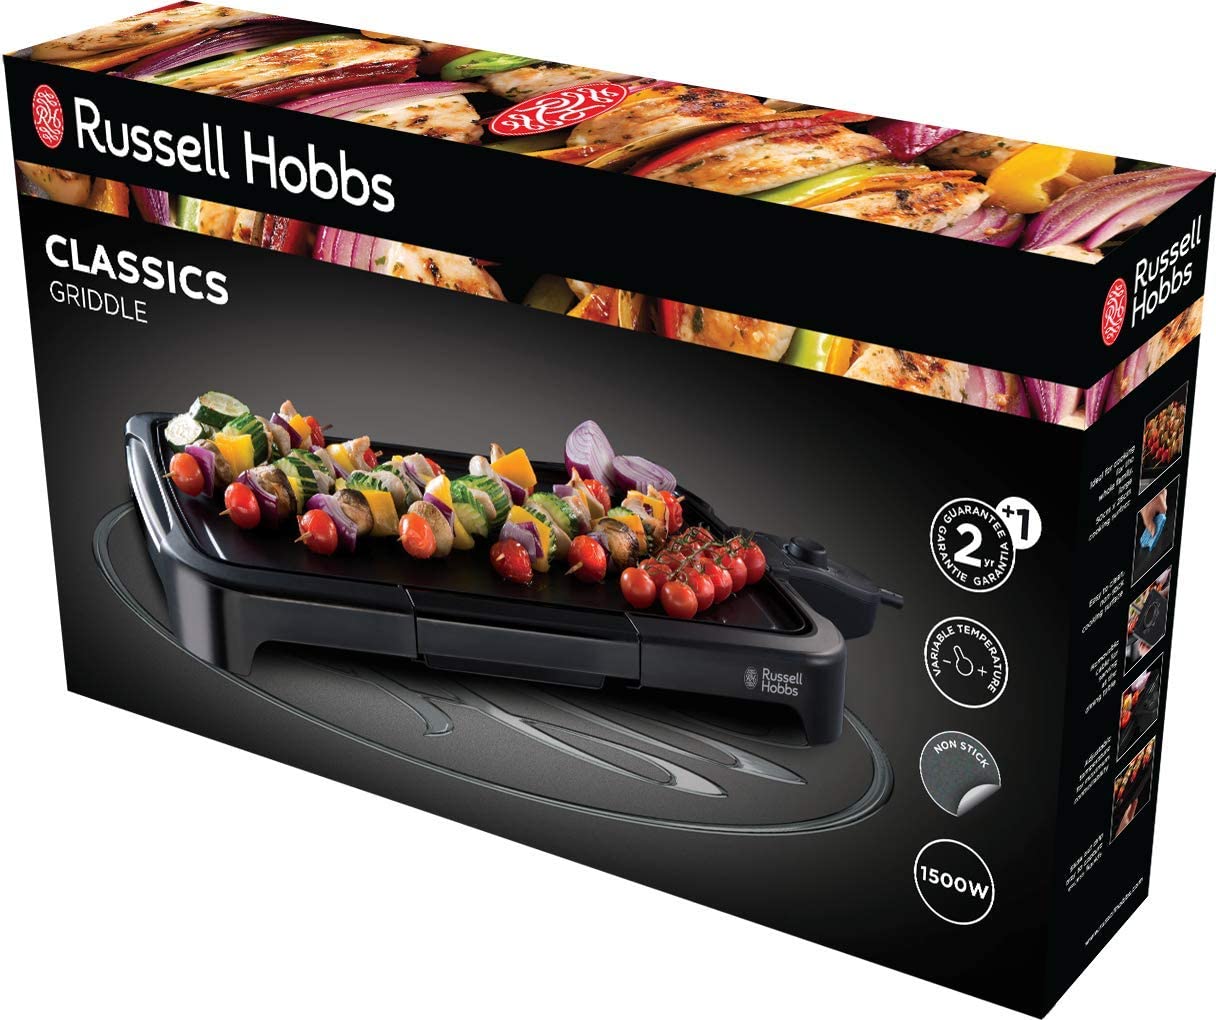 Russell Hobbs 19800 Classics Griddle 1500W Black